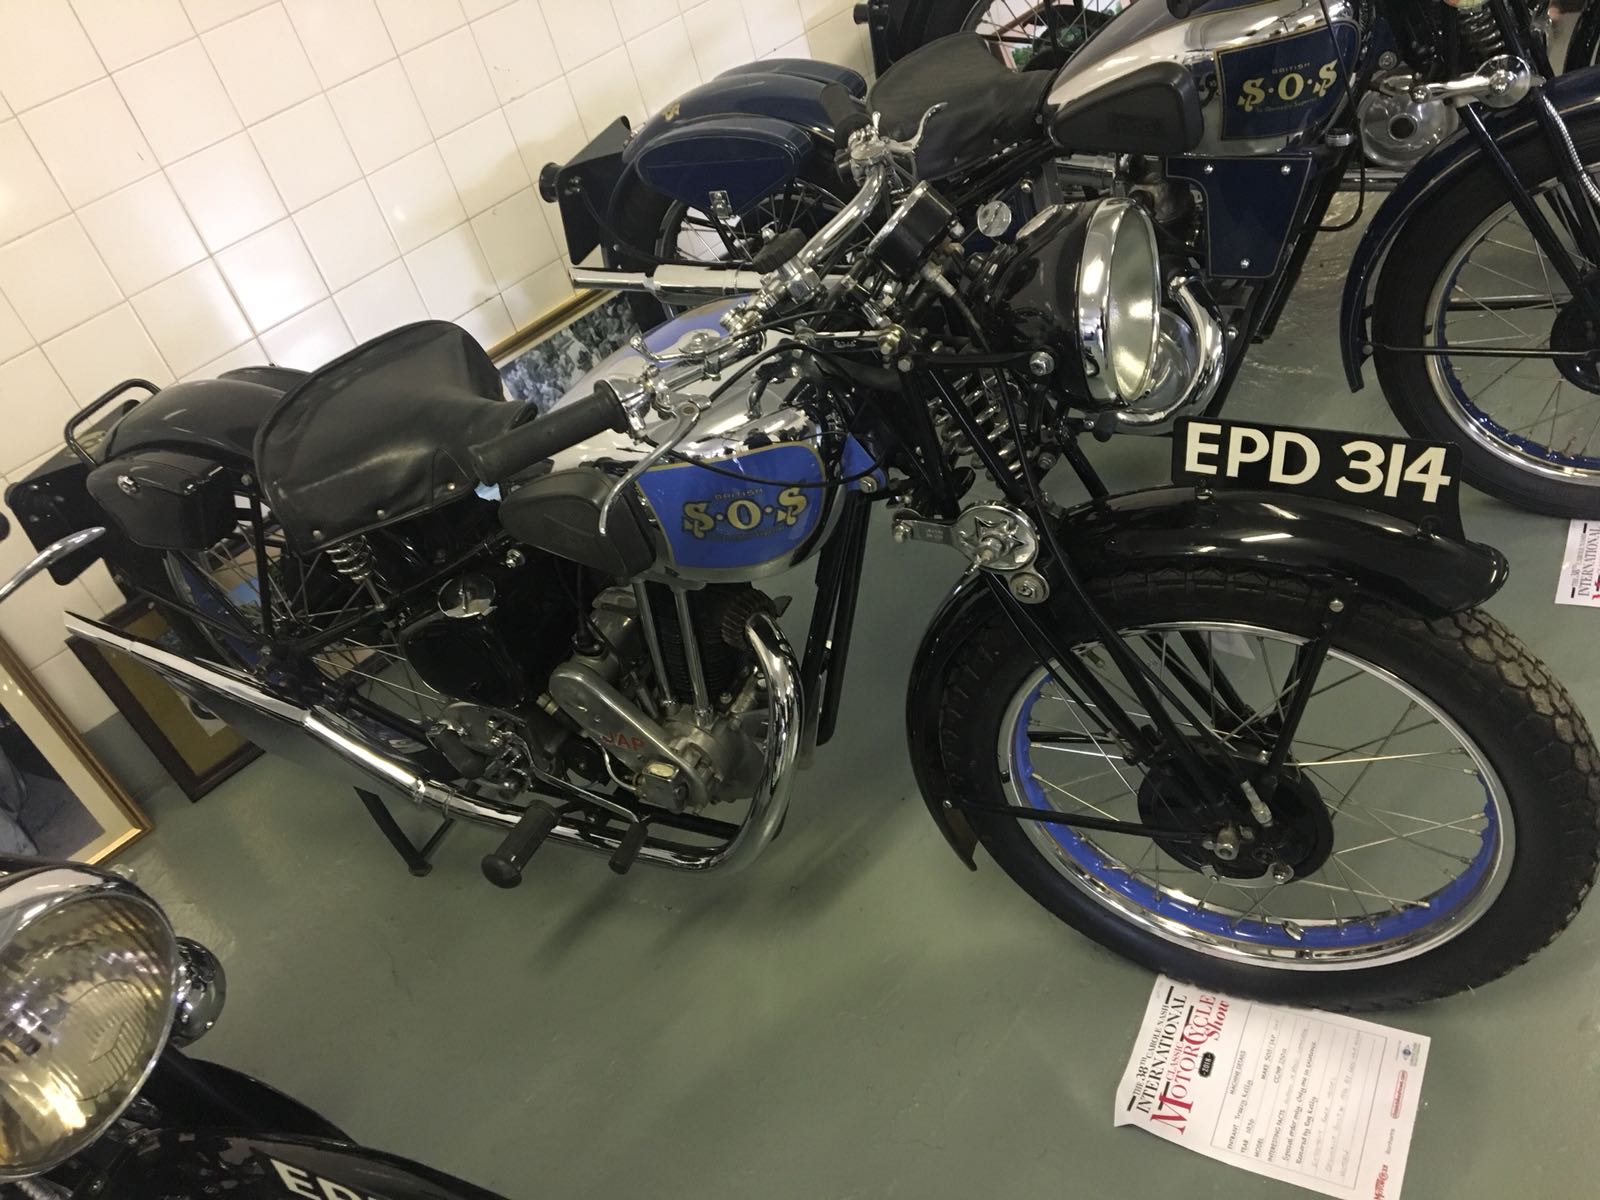 1936 SOS JAP OHV 250cc with an albion 4 speed gear box - the only one in existence